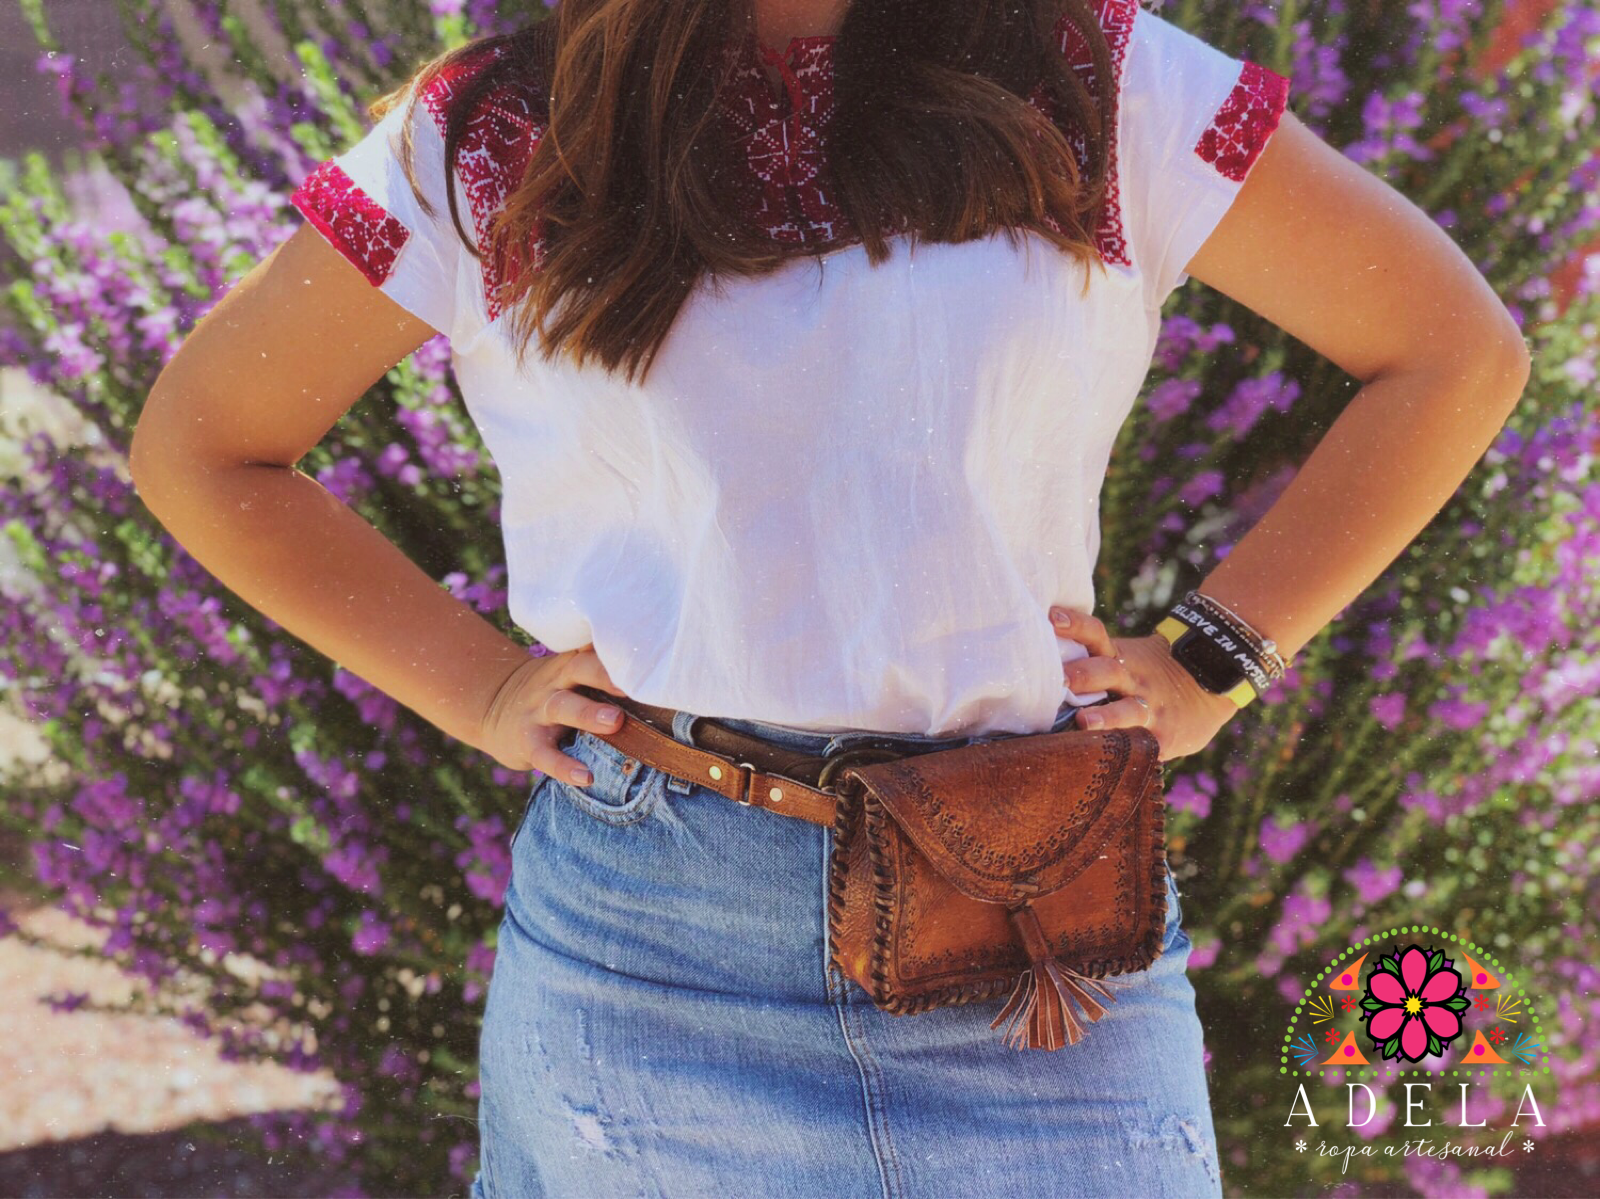 Adela Artisan Made sells products such as dresses, purses, and jewelry all inspired by Mexican traditional culture.